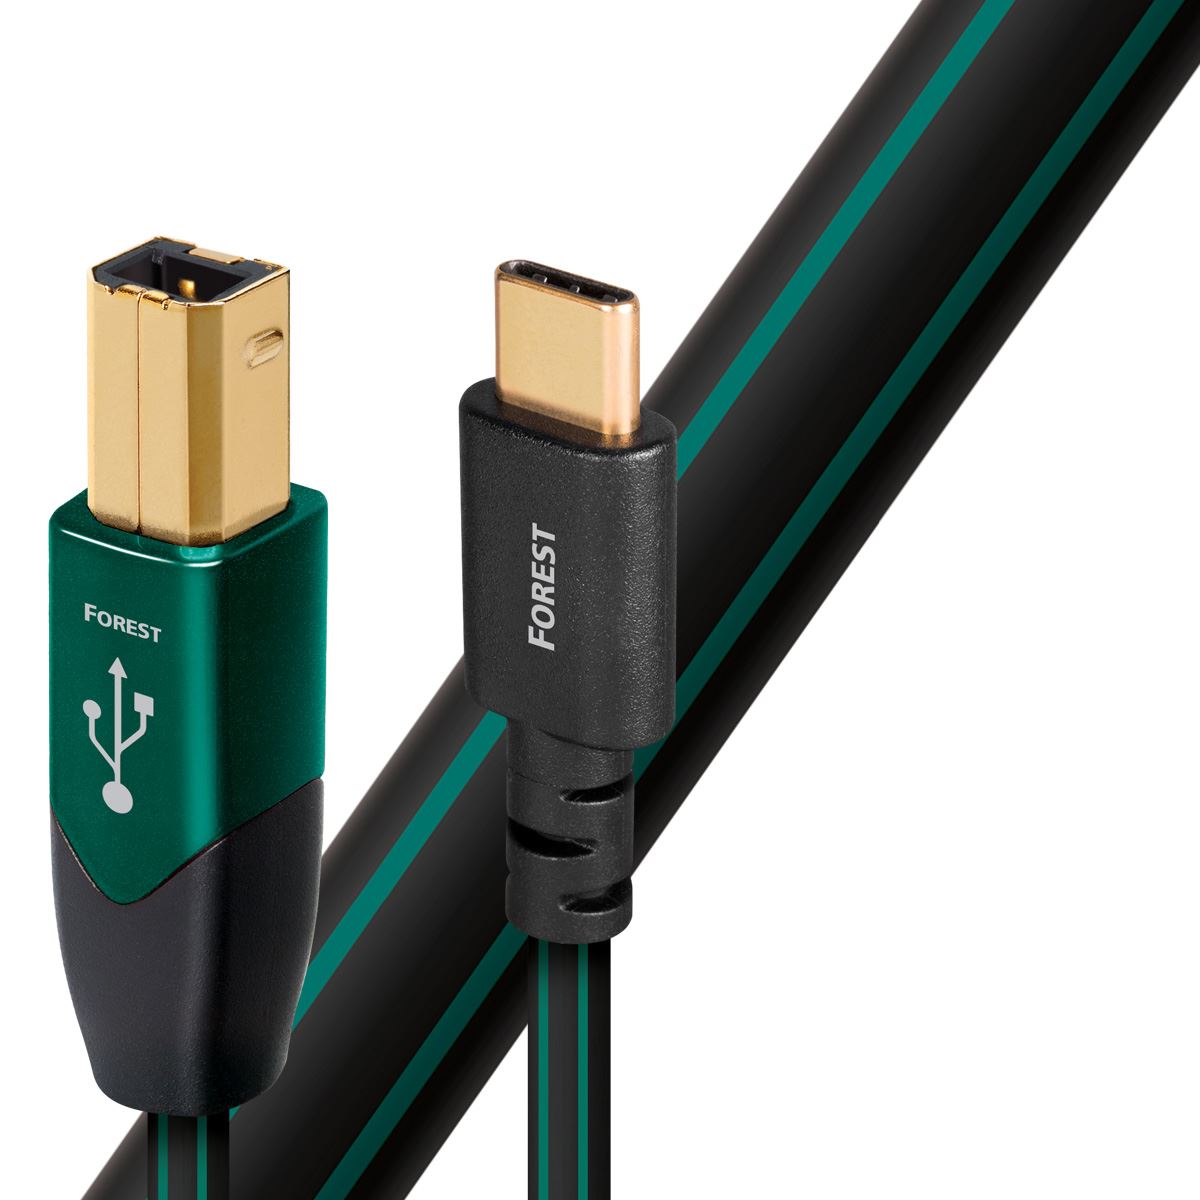 AUDIOQUEST_Forest_.75M_USB-B_to_USB-C._O.5%_silver._Hard-cell_foam._Metal-layer_noise_dissipation_Jacket_-_black_PVC_with_green_stripes. 1914